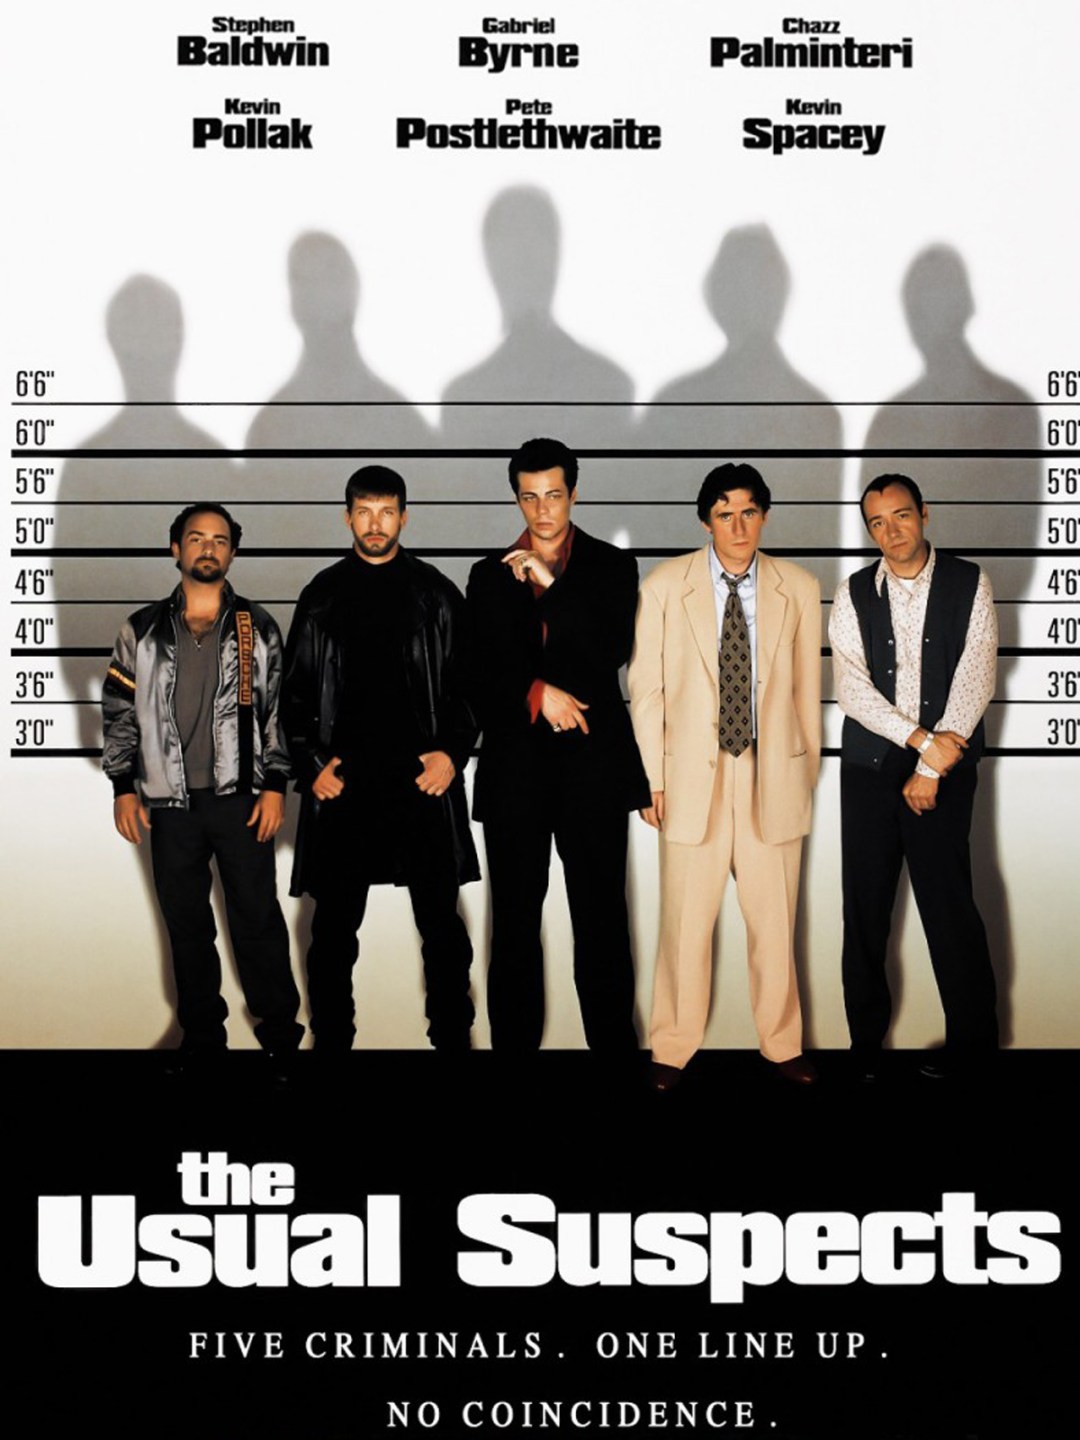 The-Usual-Suspects-Lineup-Poster.jpg